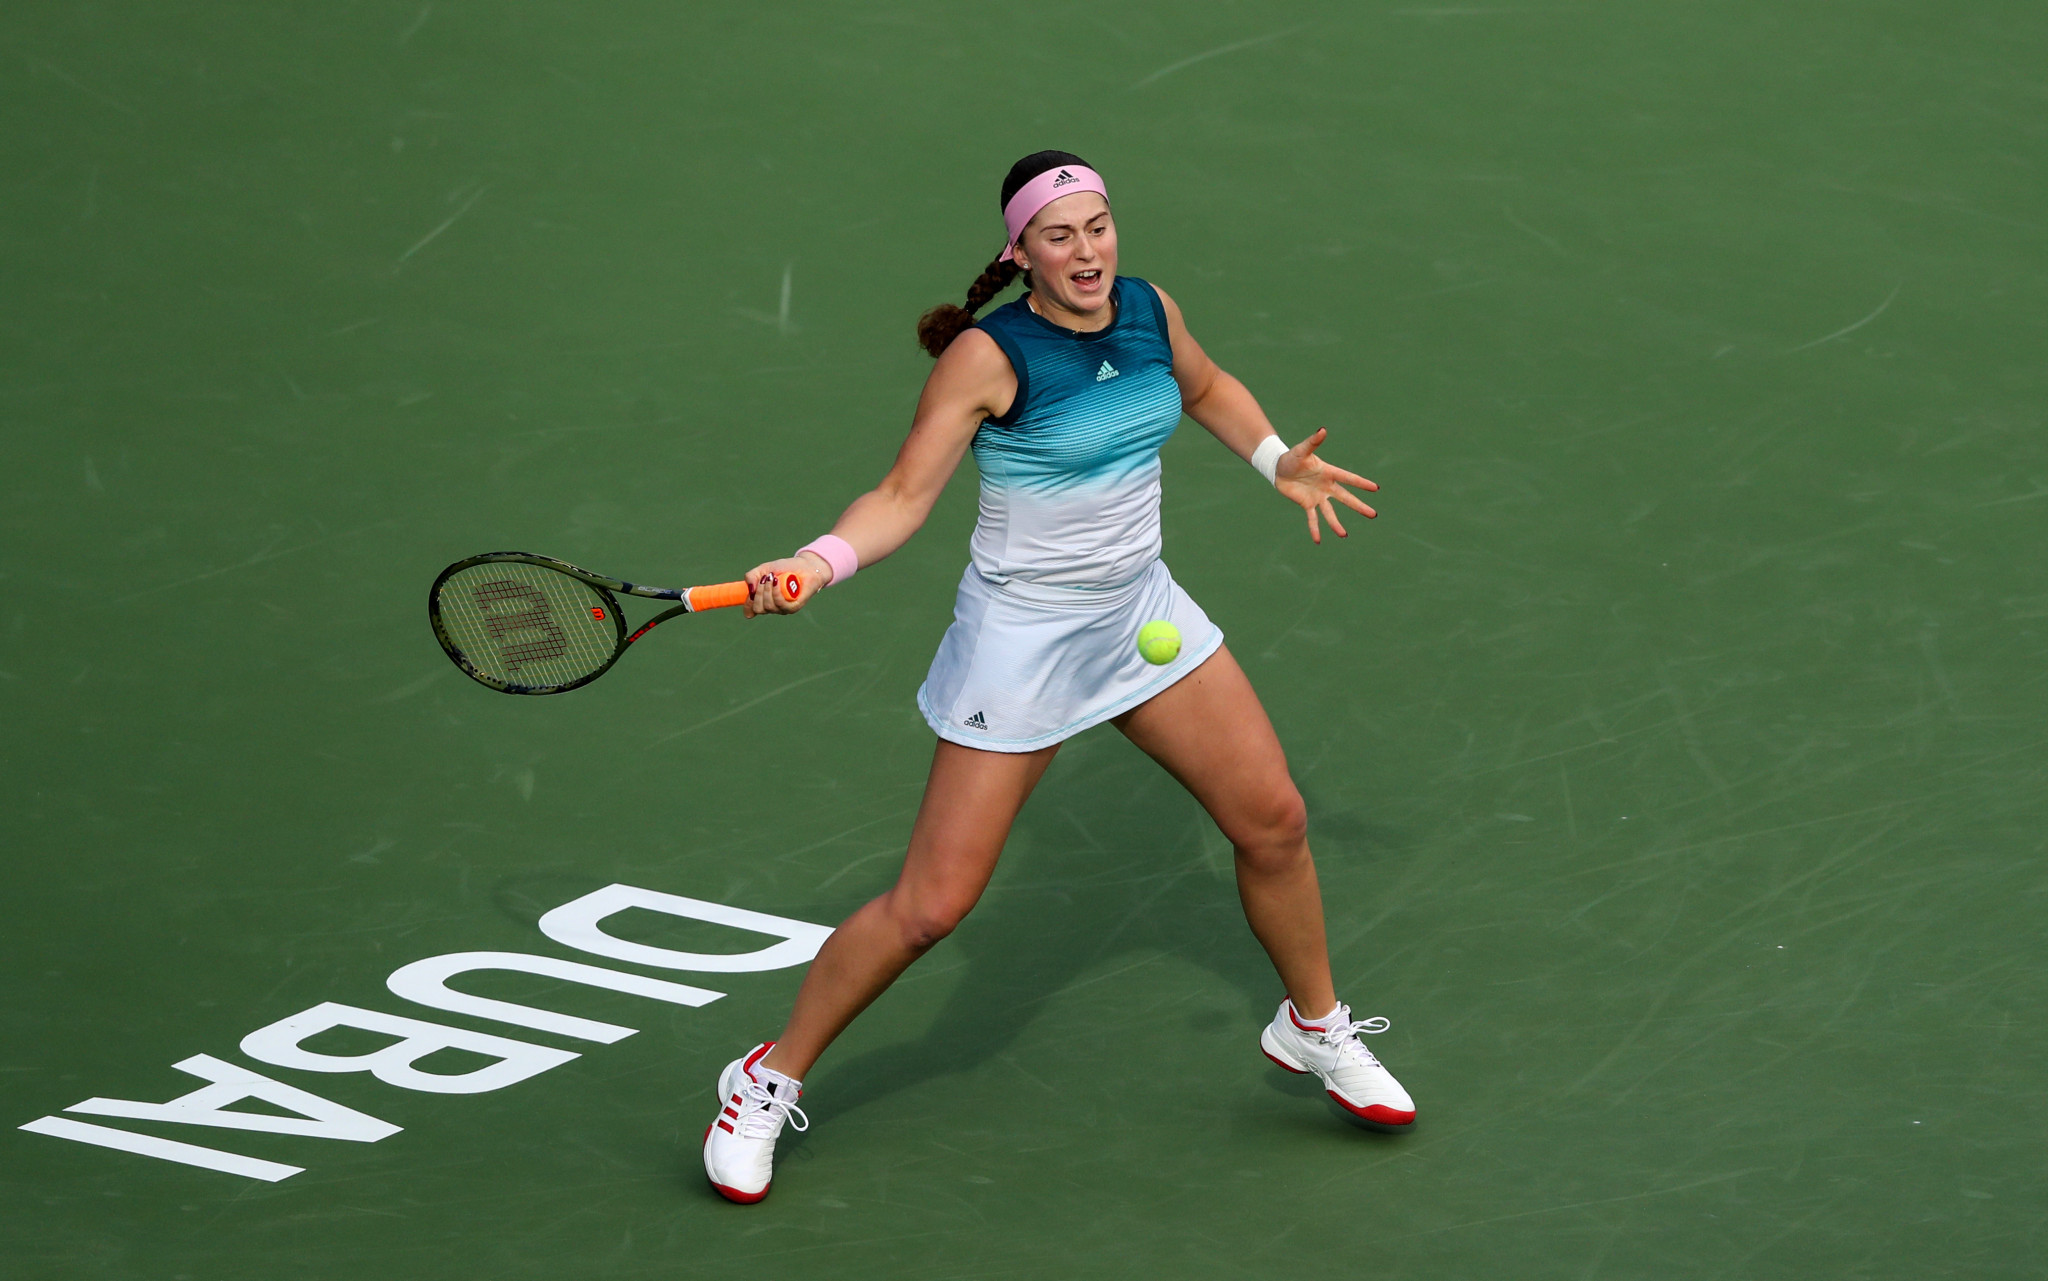 Latvia's Jeļena Ostapenko suffered defeat in the first round ©Getty Images